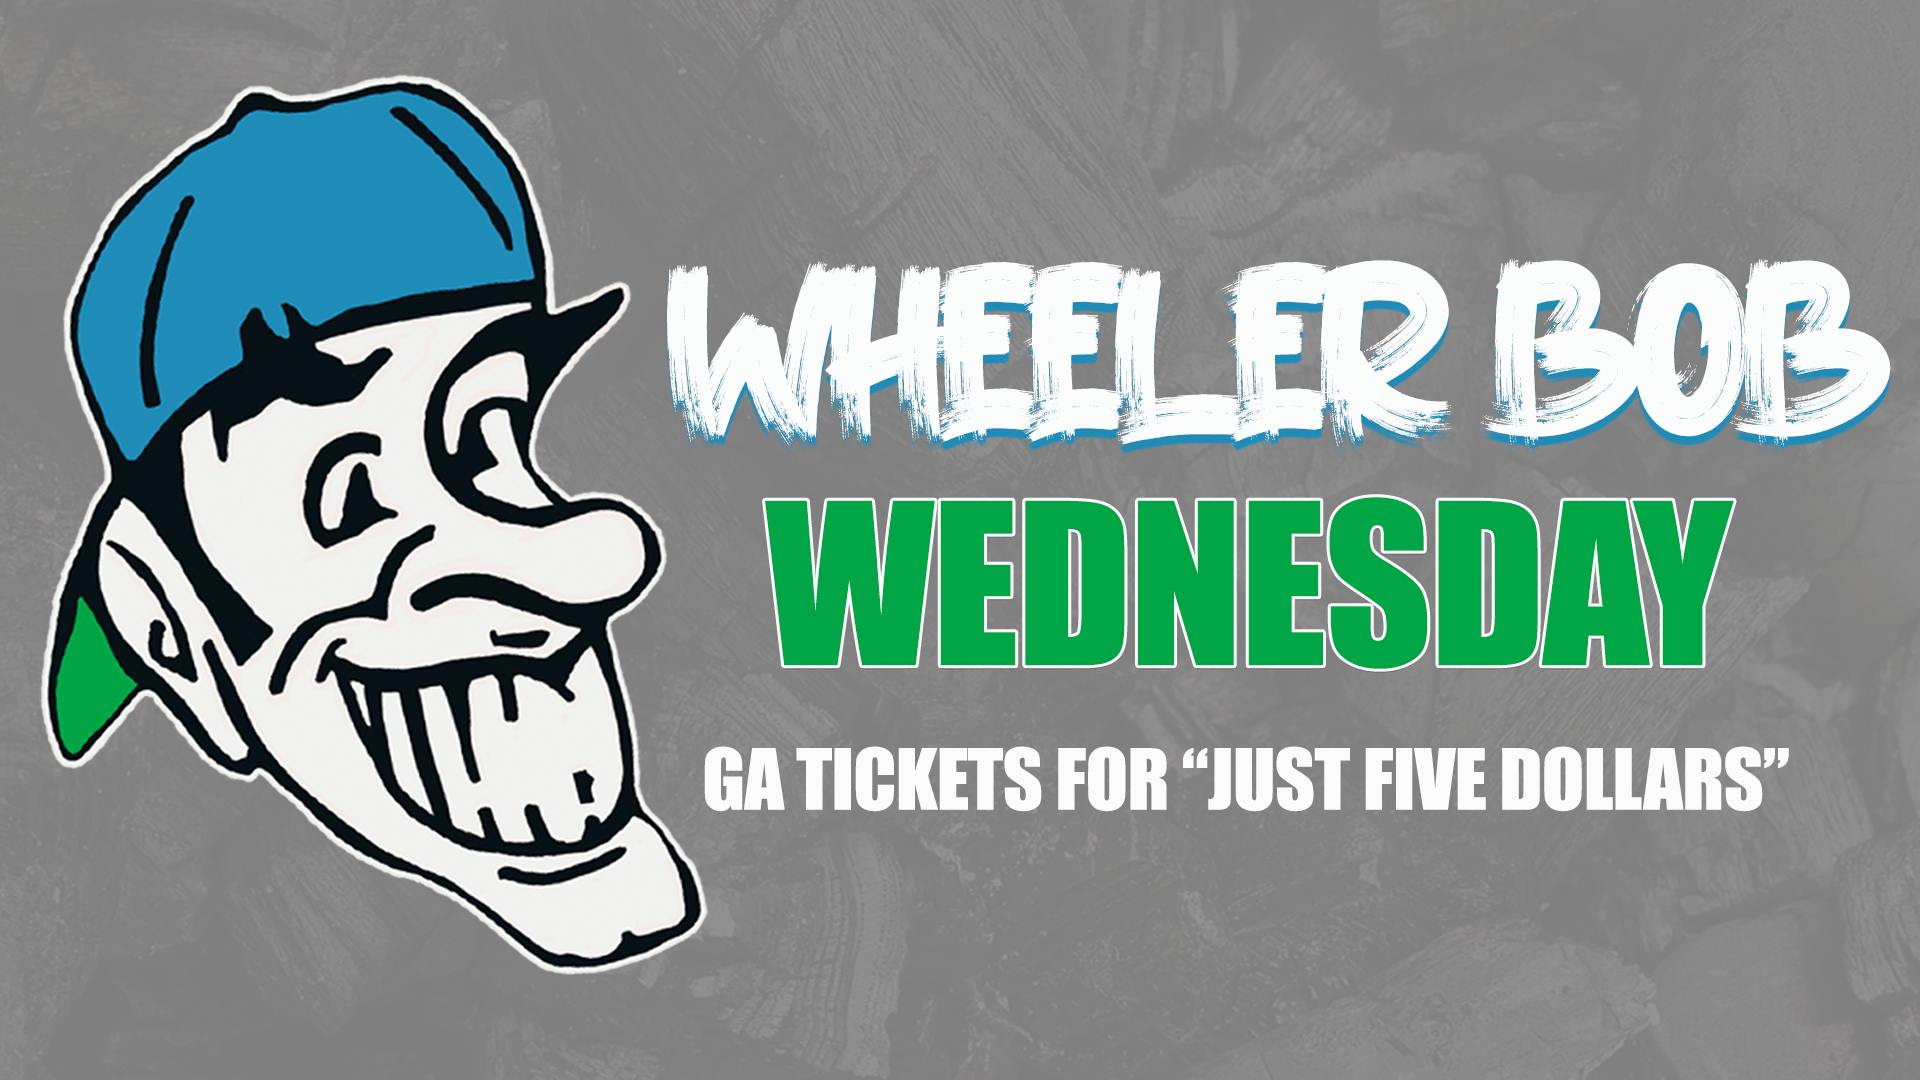 DIRTY BIRDS HOST WHEELER BOB WEDNESDAY TOMORROW WITH TICKETS FOR “JUST FIVE DOLLARS!”